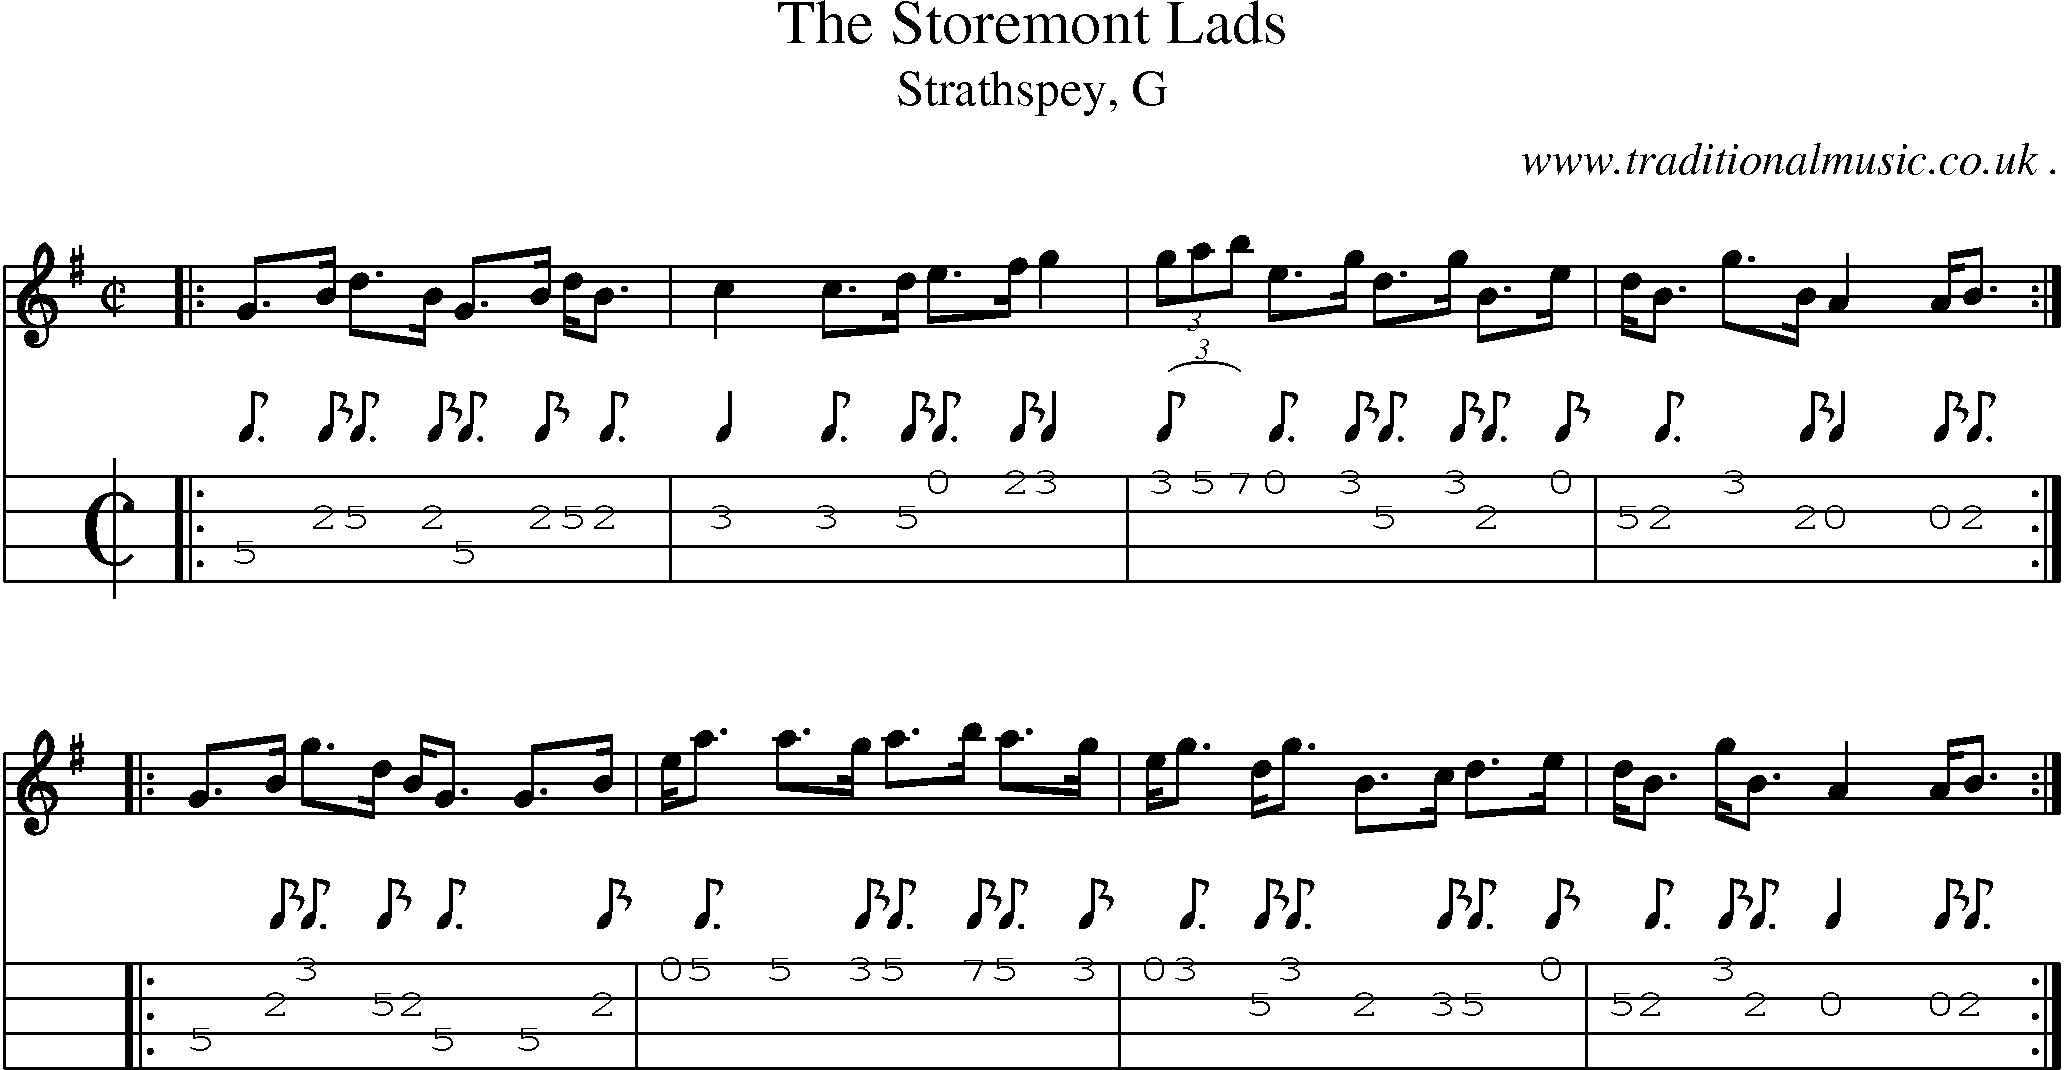 Sheet-music  score, Chords and Mandolin Tabs for The Storemont Lads